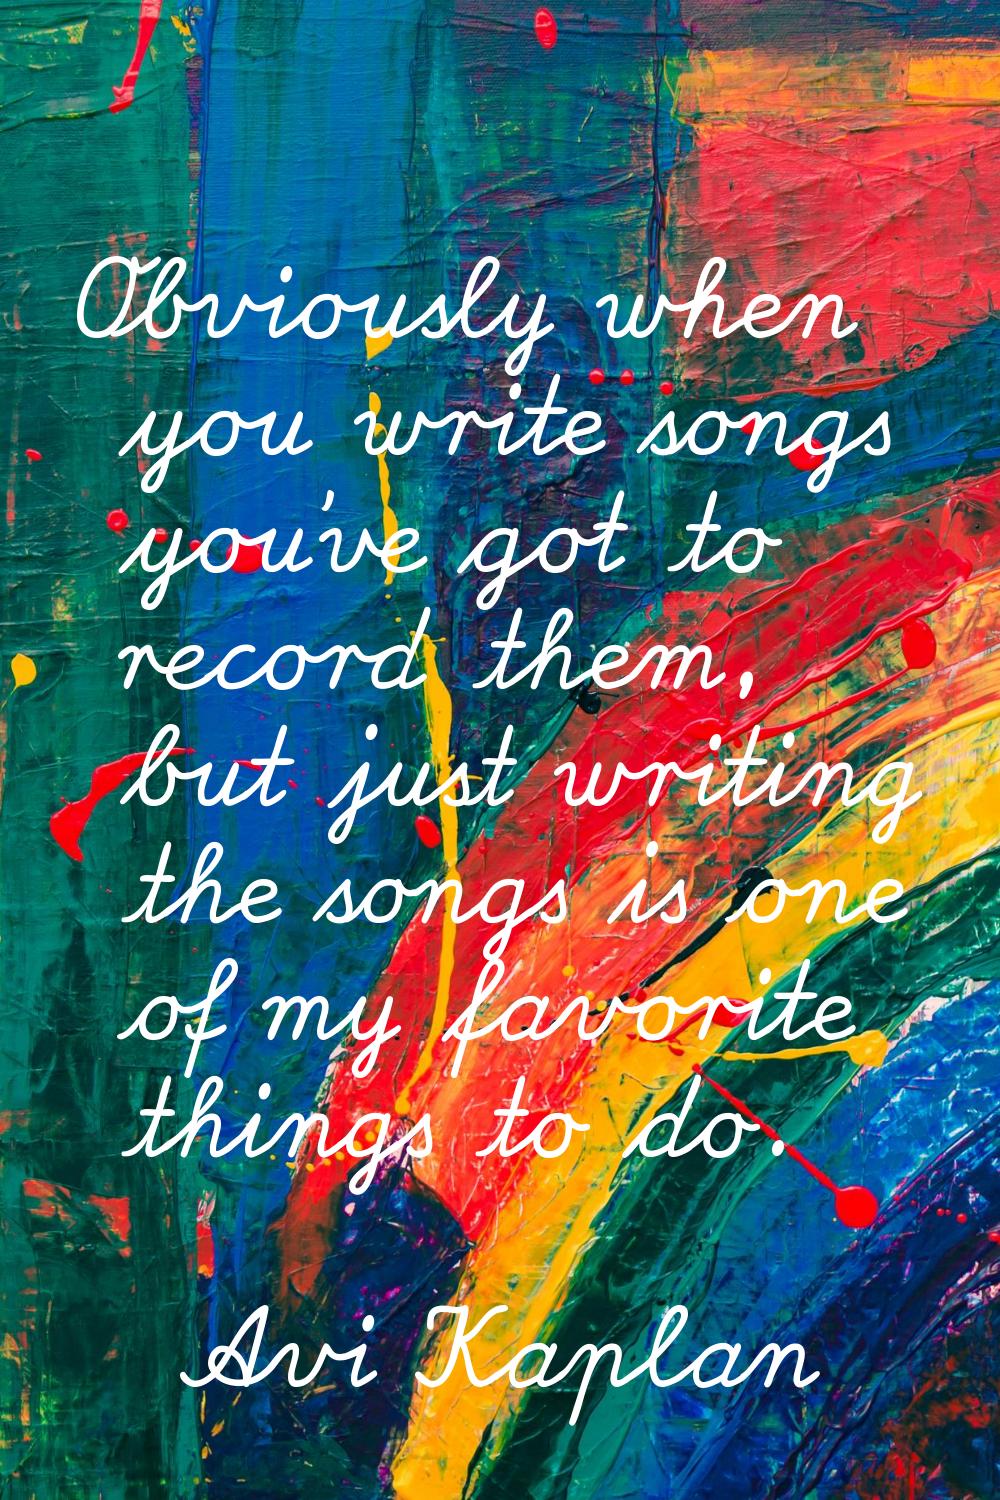 Obviously when you write songs you've got to record them, but just writing the songs is one of my f